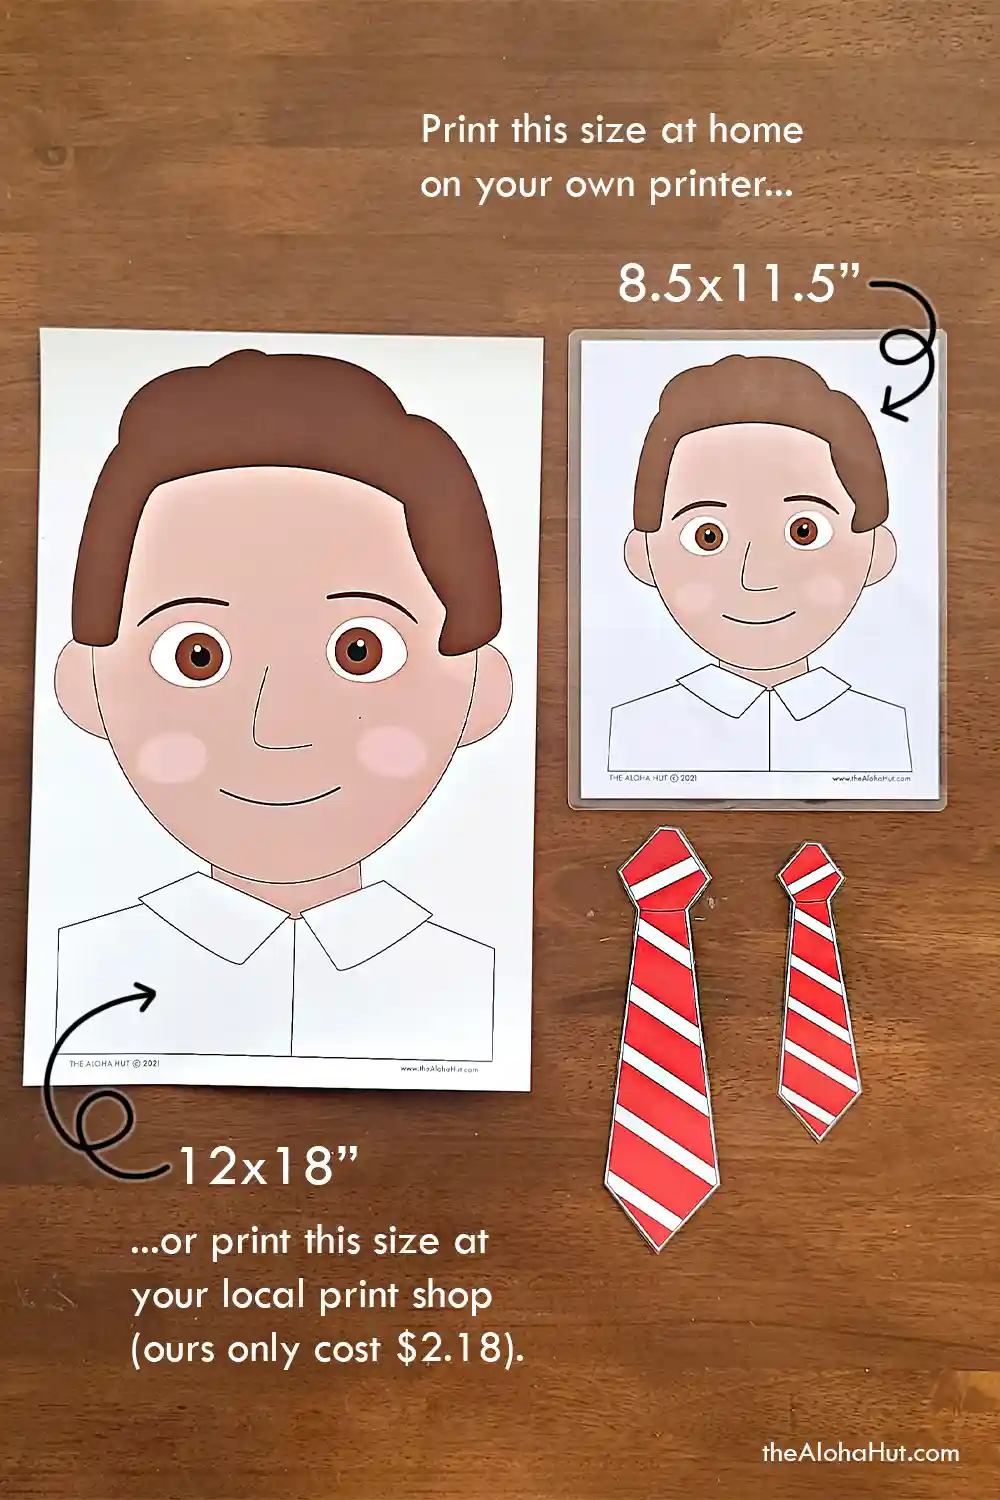 Pin the tie on dad Father's Day game and activity. Perfect activity for primary singing time at church or for the kids to play with dad. Print the Father's Day coloring pages and help kids draw a picture of dad or grandpa. Then print the ties and have the kids write messages on the ties. Makes a great Father's Day card and easy Father's Day gift from the kids.